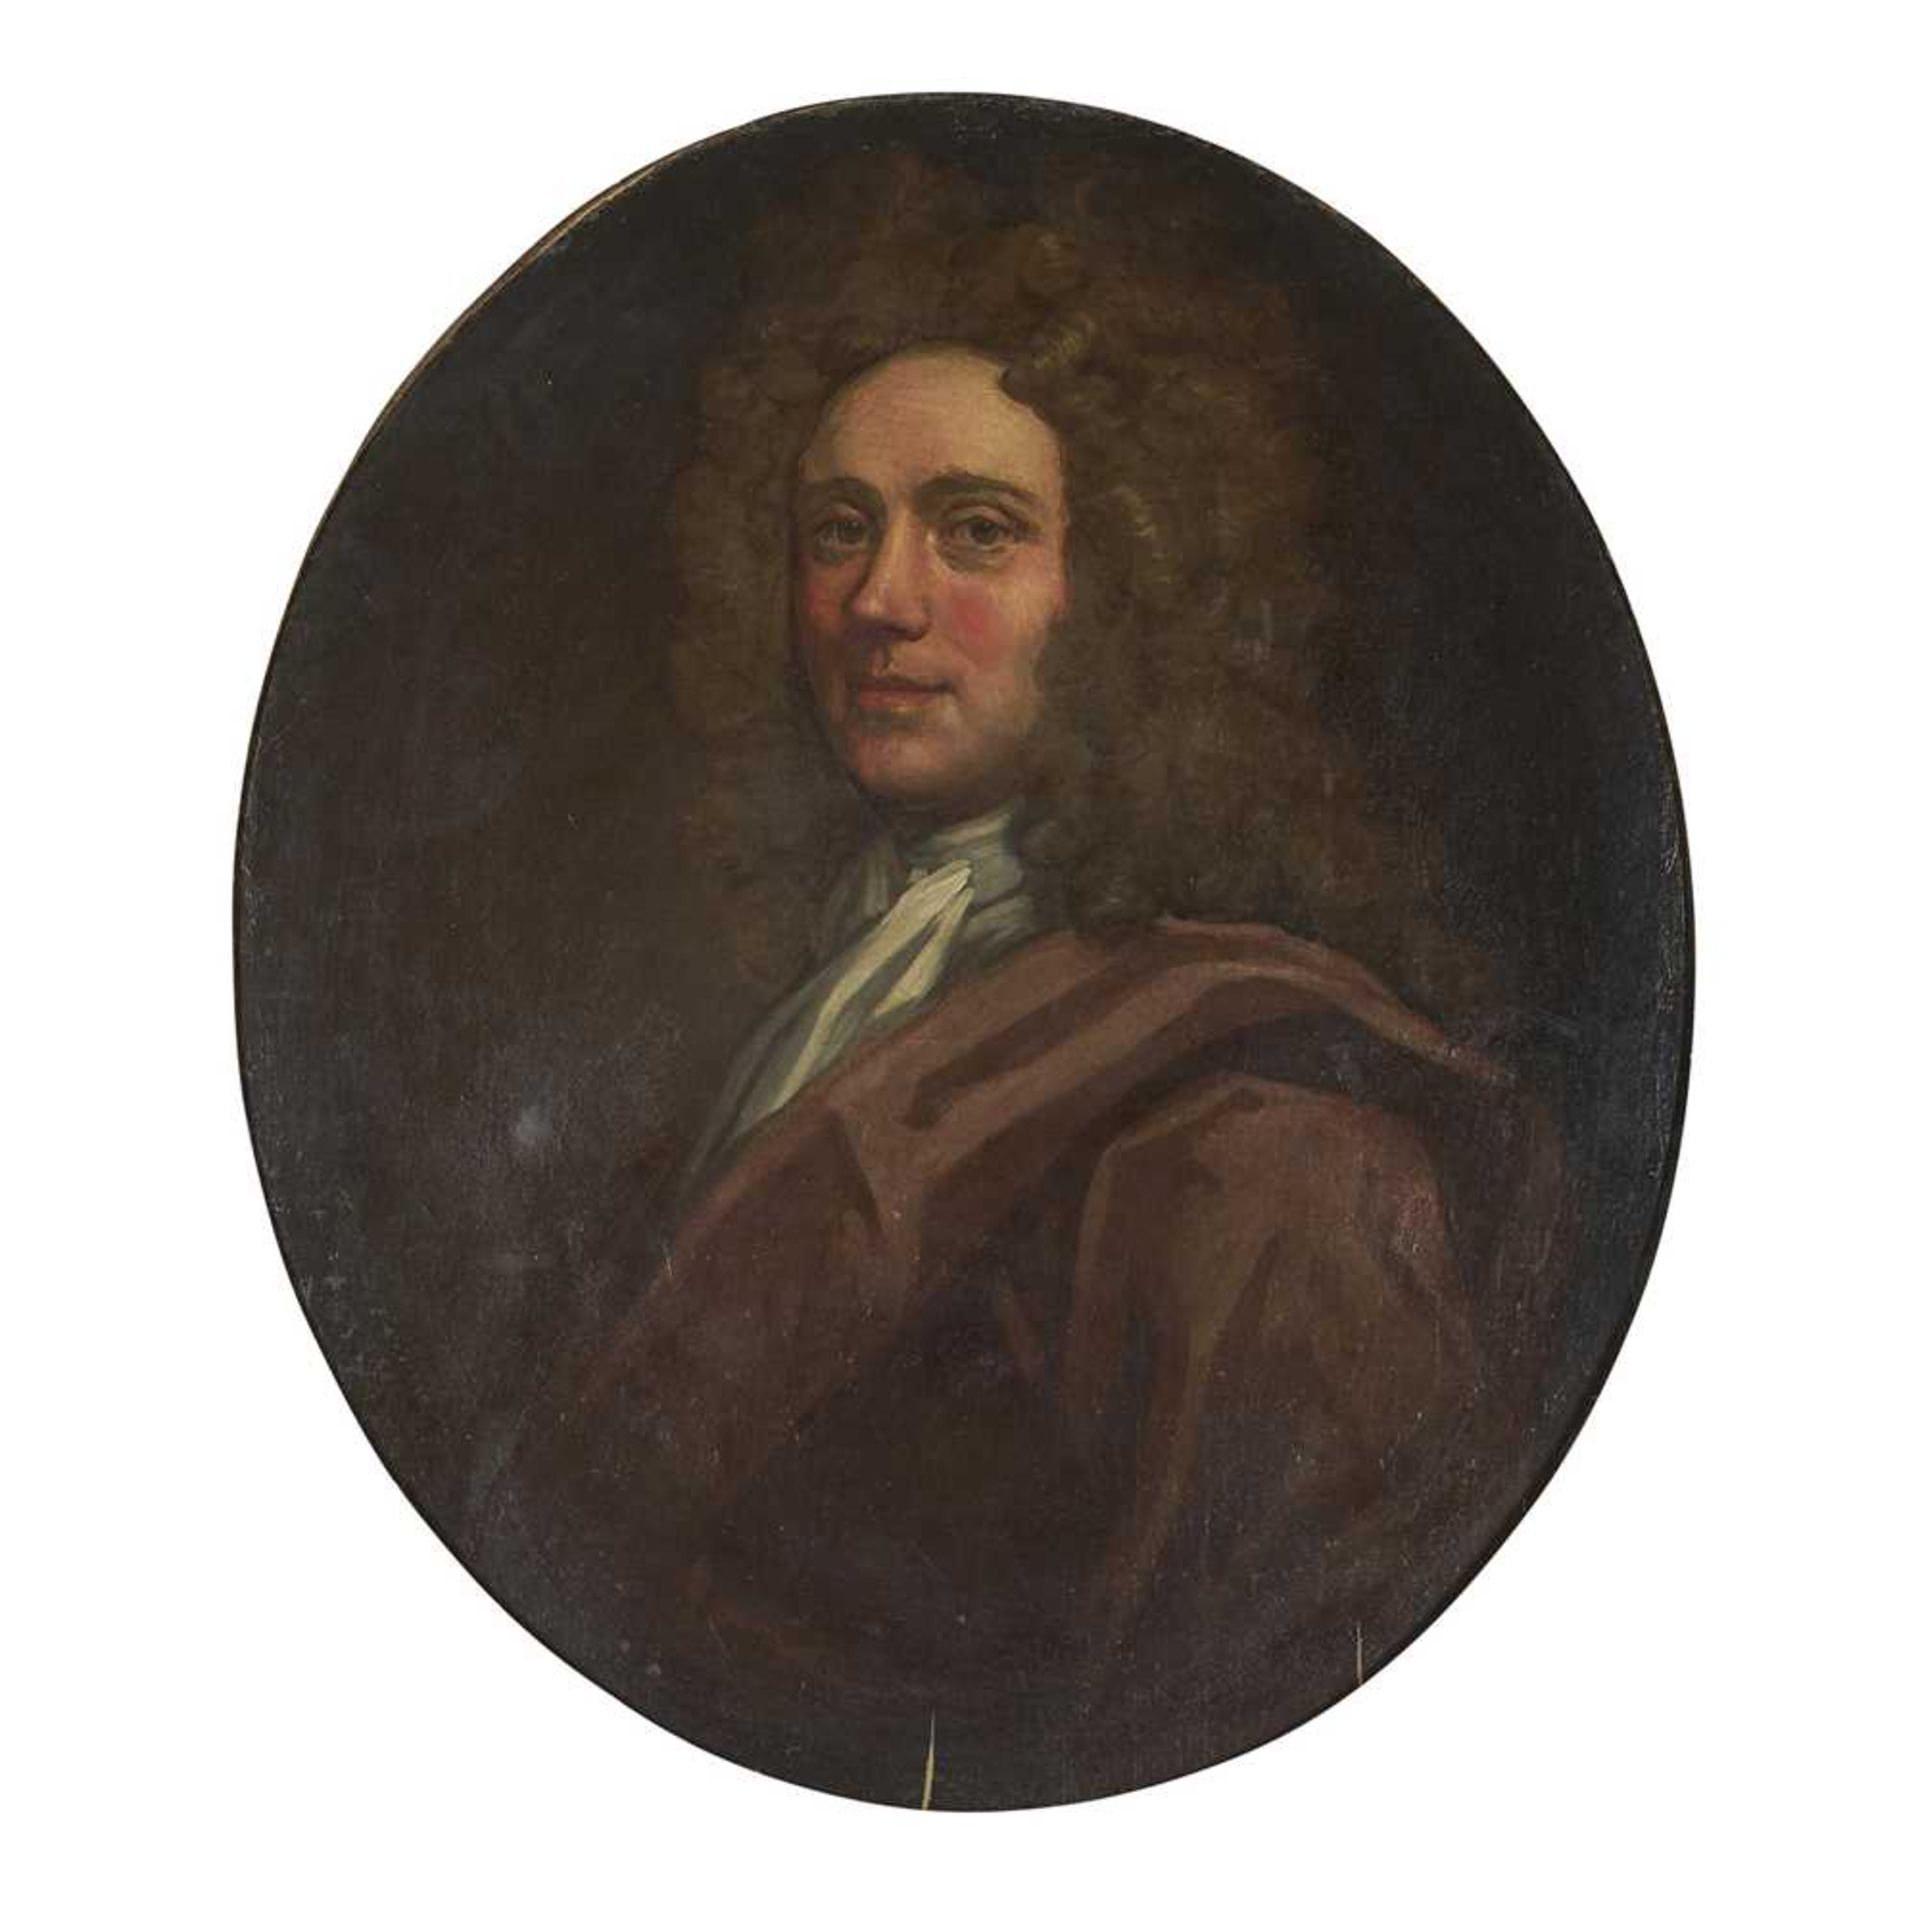 FOLLOWER OF WILLIAM AIKMAN HEAD AND SHOULDER PORTRAIT OF A MAN IN PLUM COAT